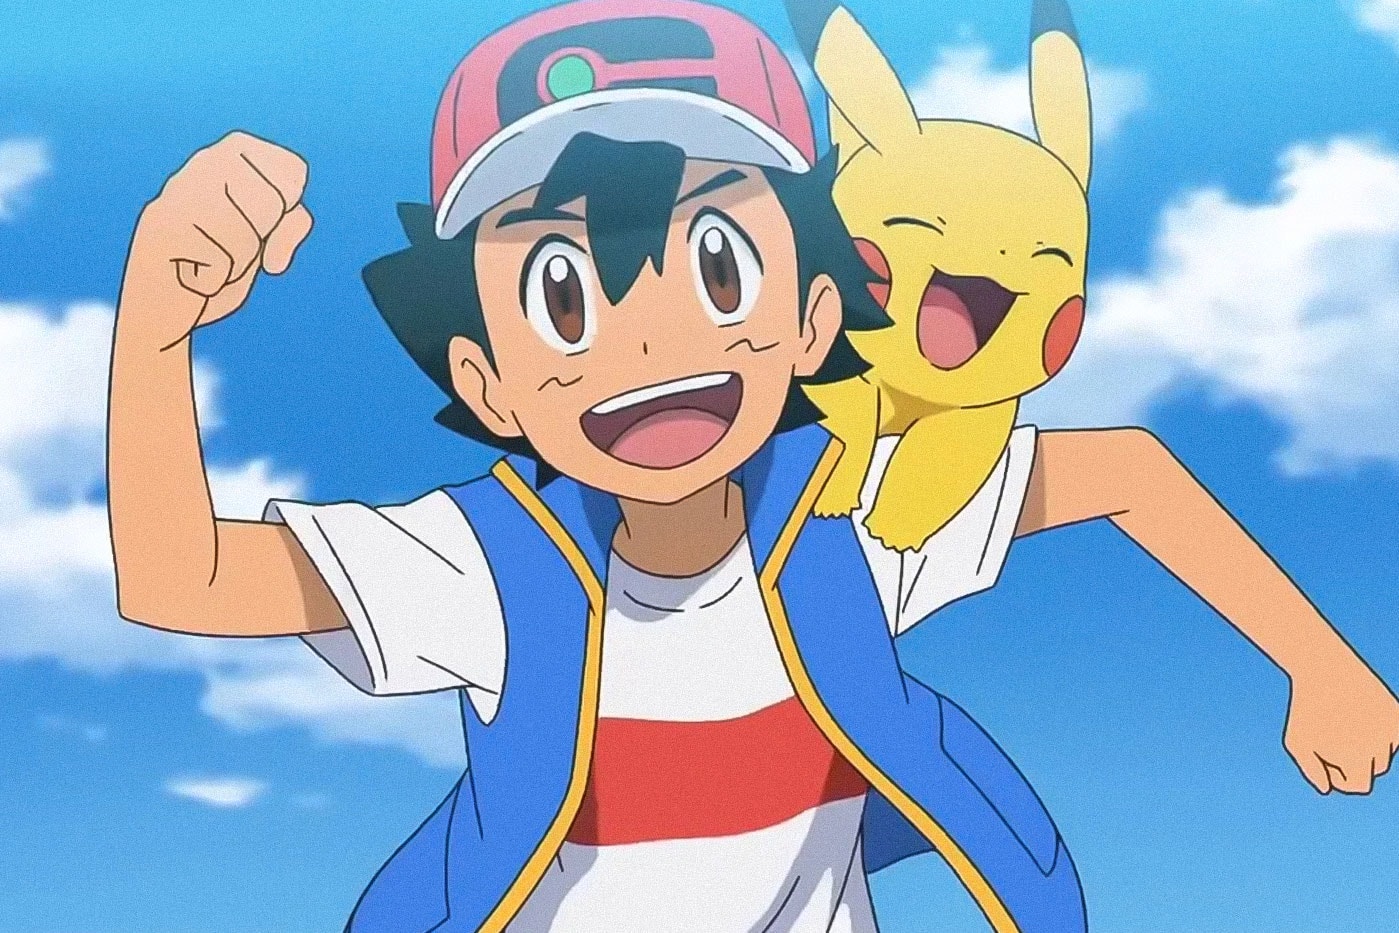 Here's All 3 New Pokémon Anime Series Releasing in 2023